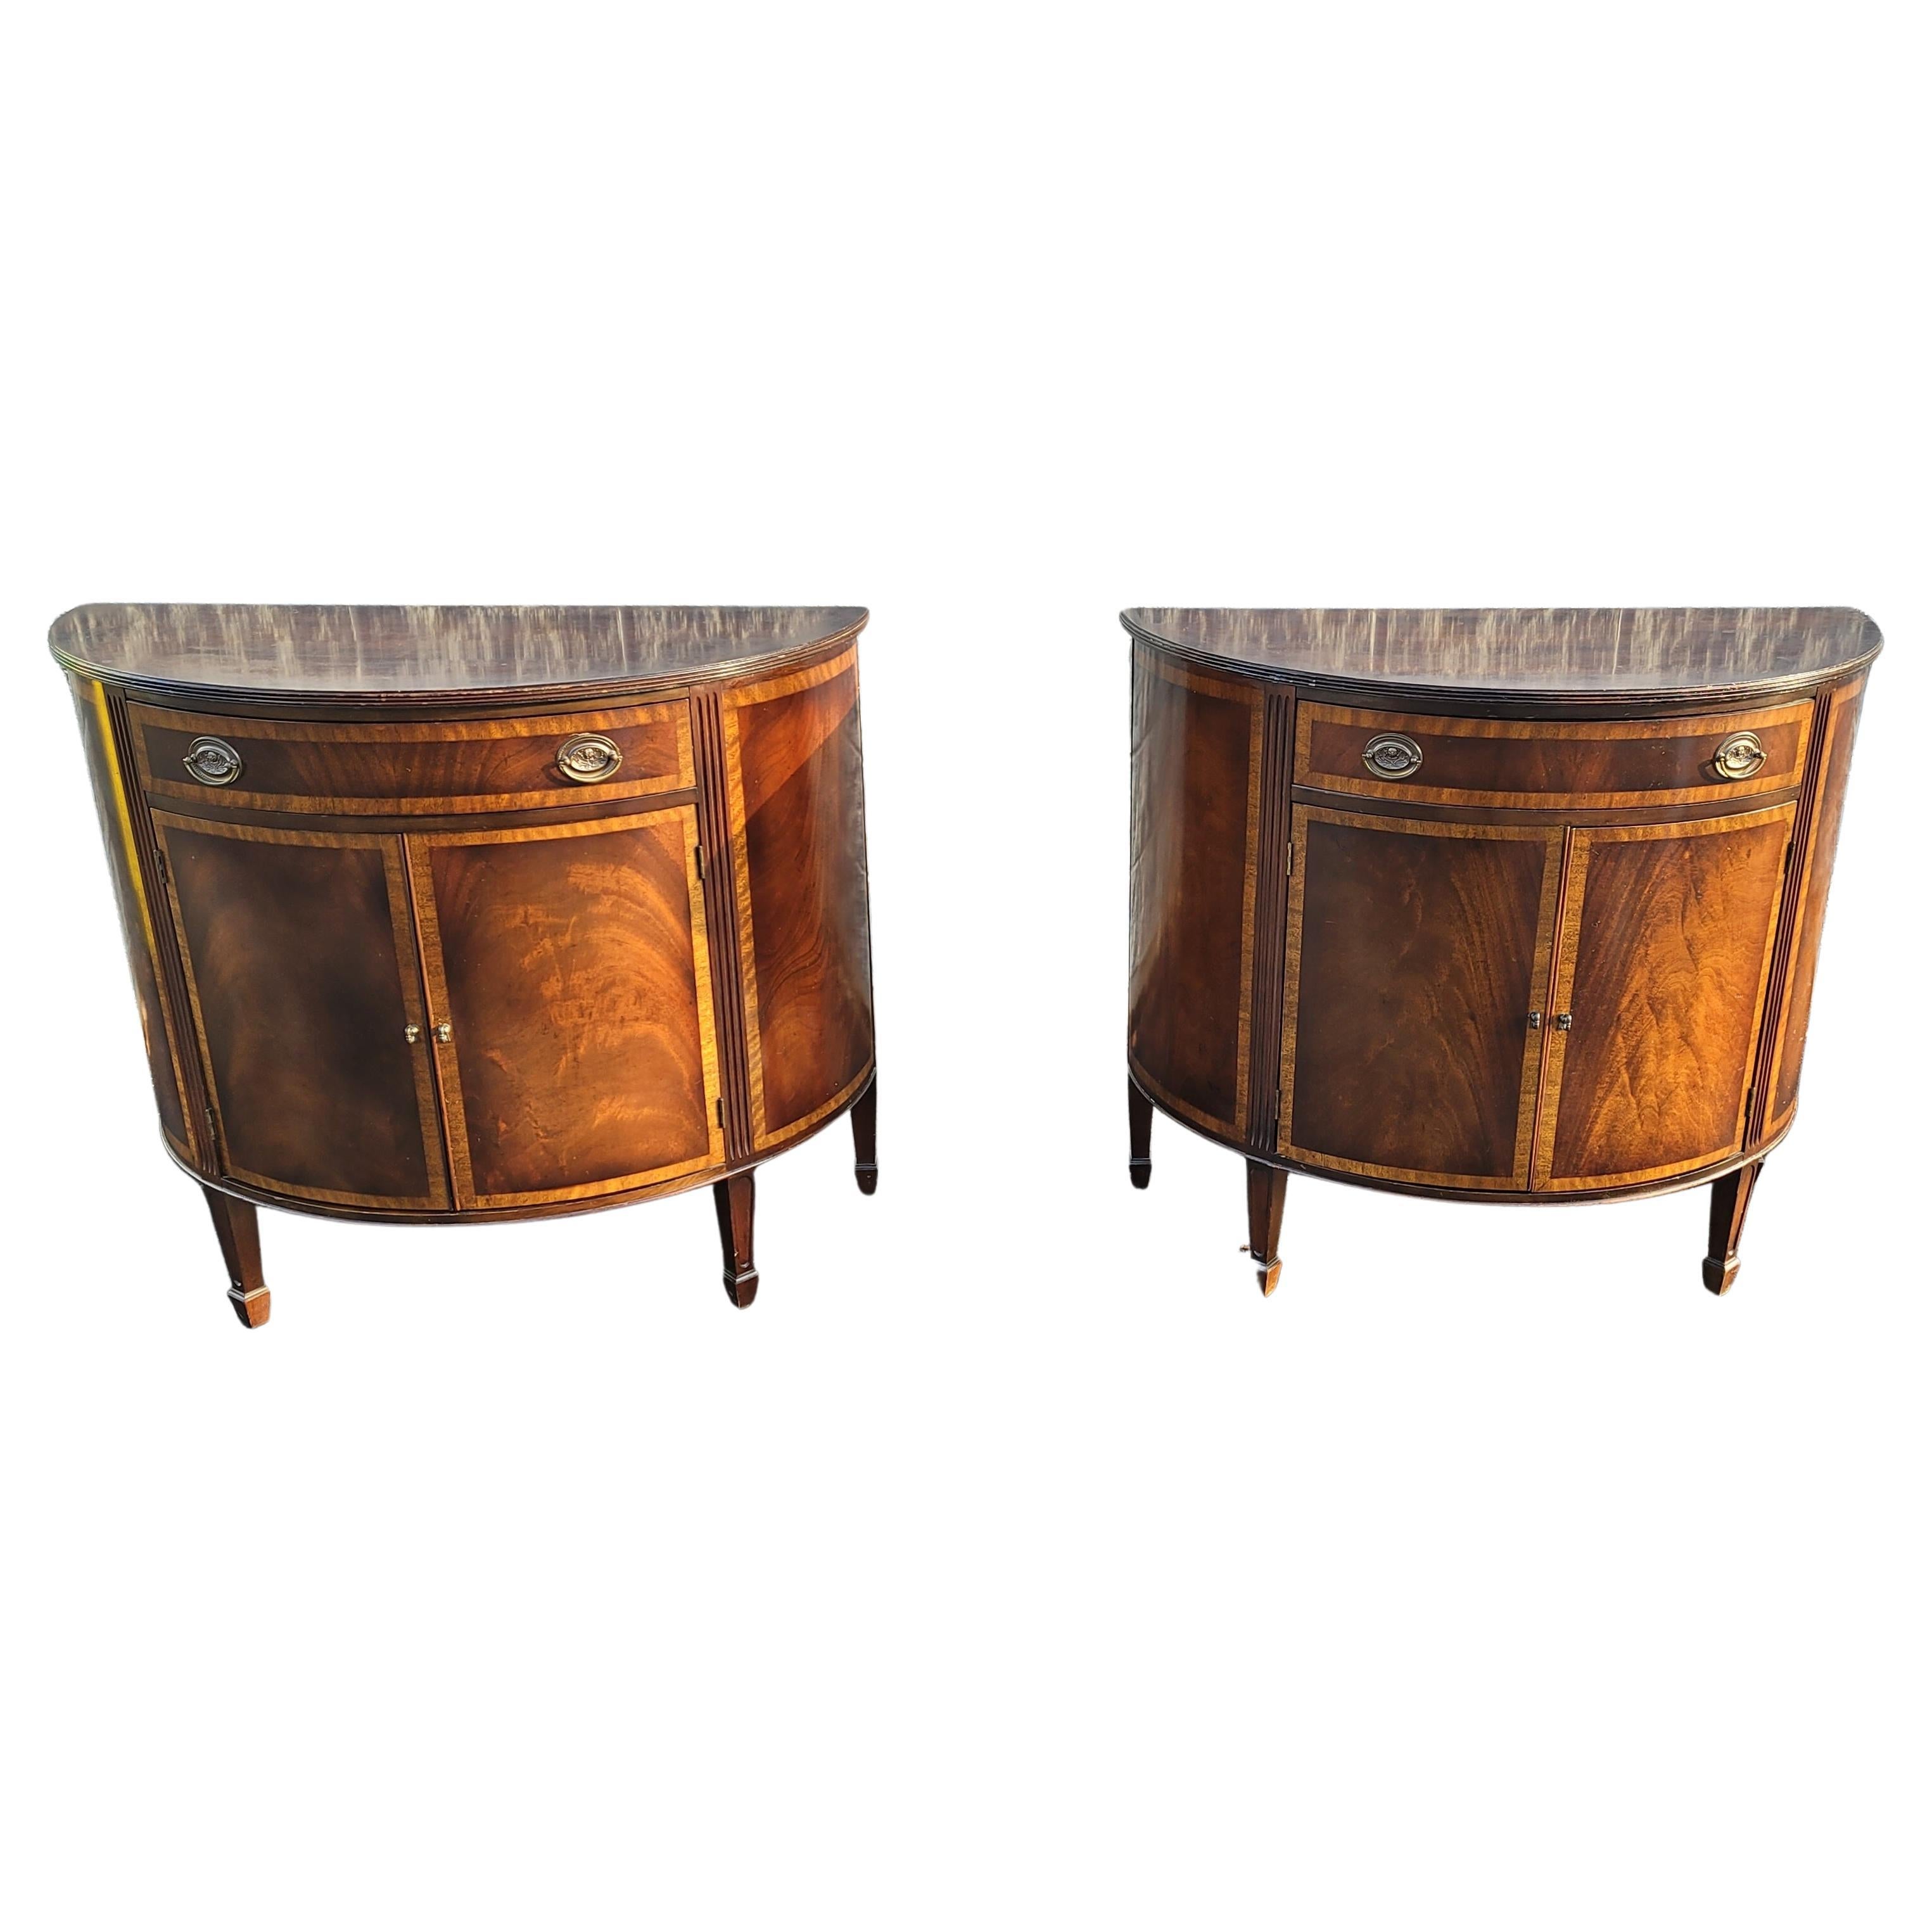 American Mid-19th Centruty George III Demilune Banded Flame Mahogany Commodes Cabinets